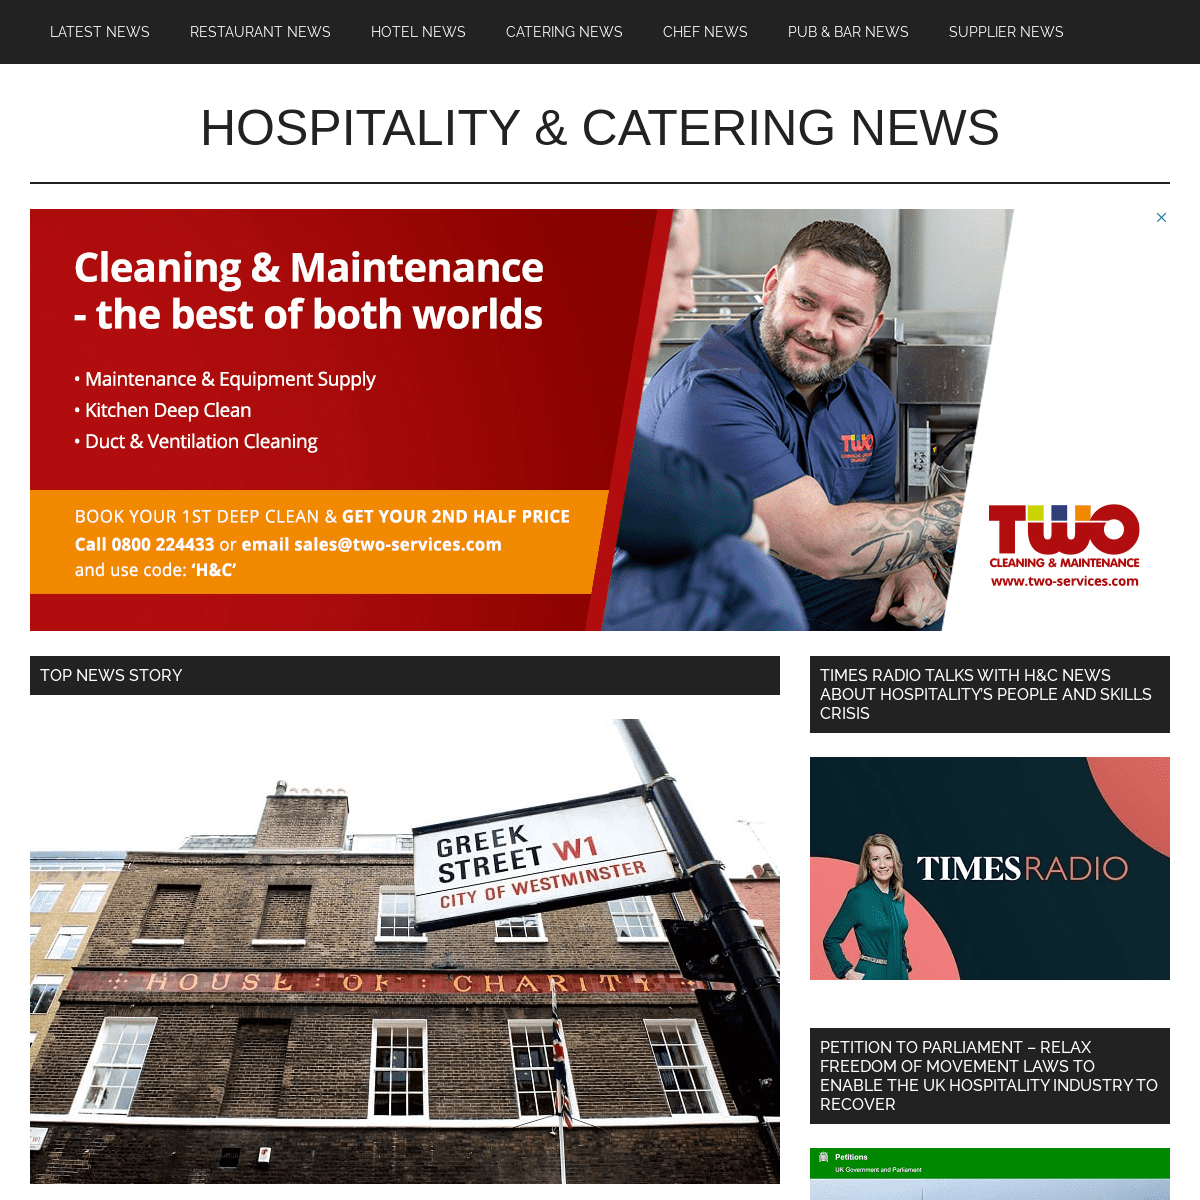 A complete backup of https://hospitalityandcateringnews.com